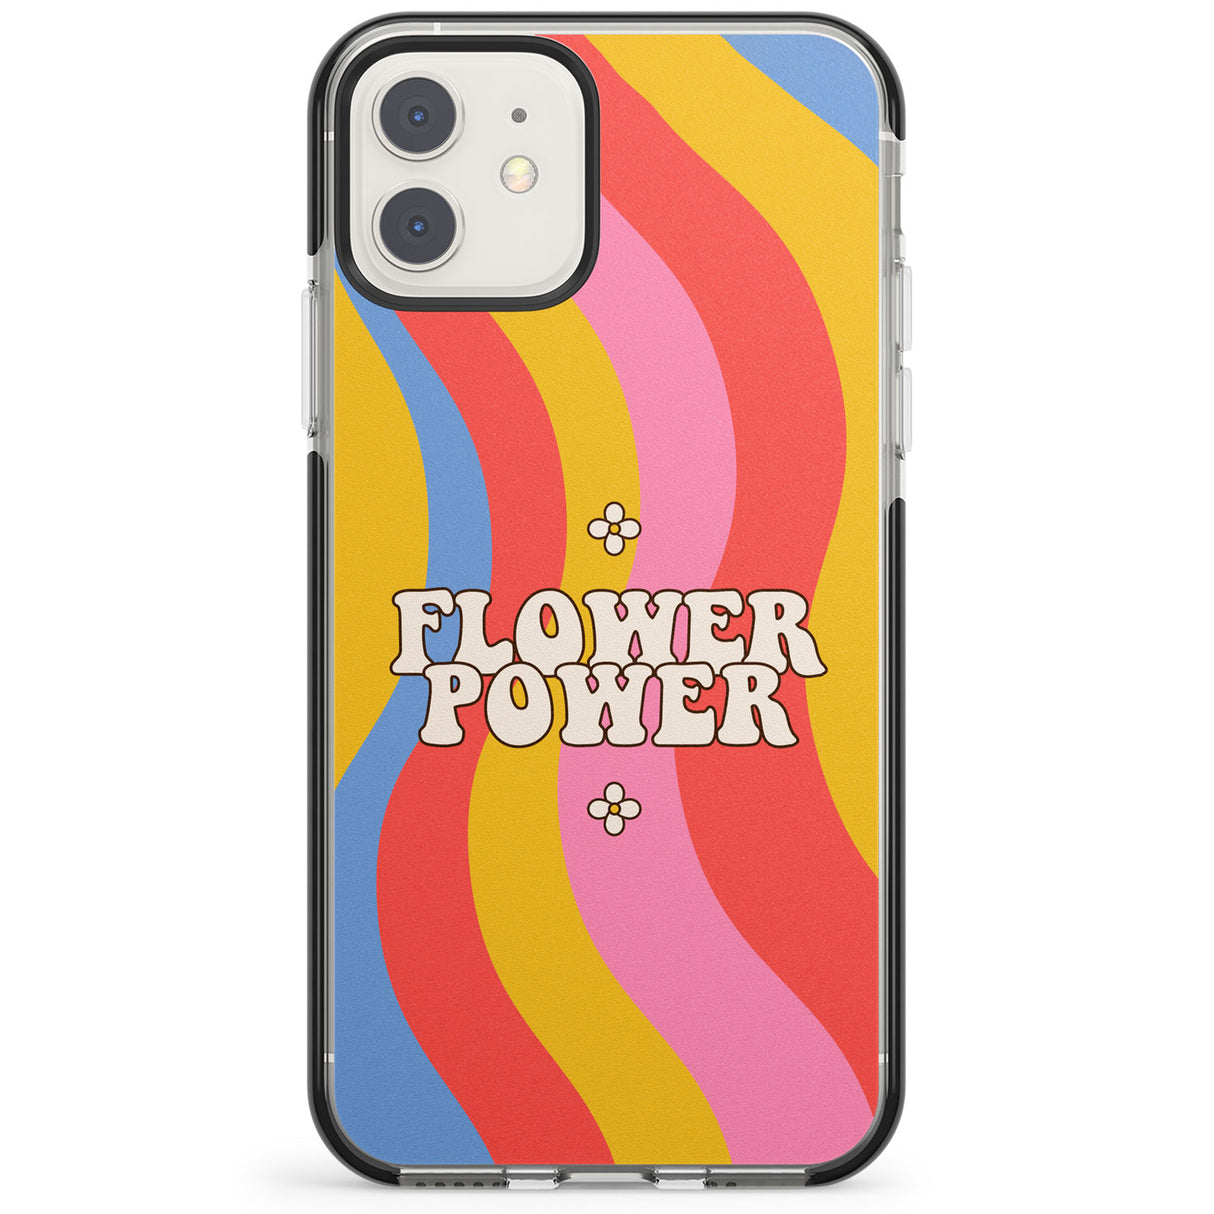 Melting Flower Power Impact Phone Case for iPhone 11, iphone 12